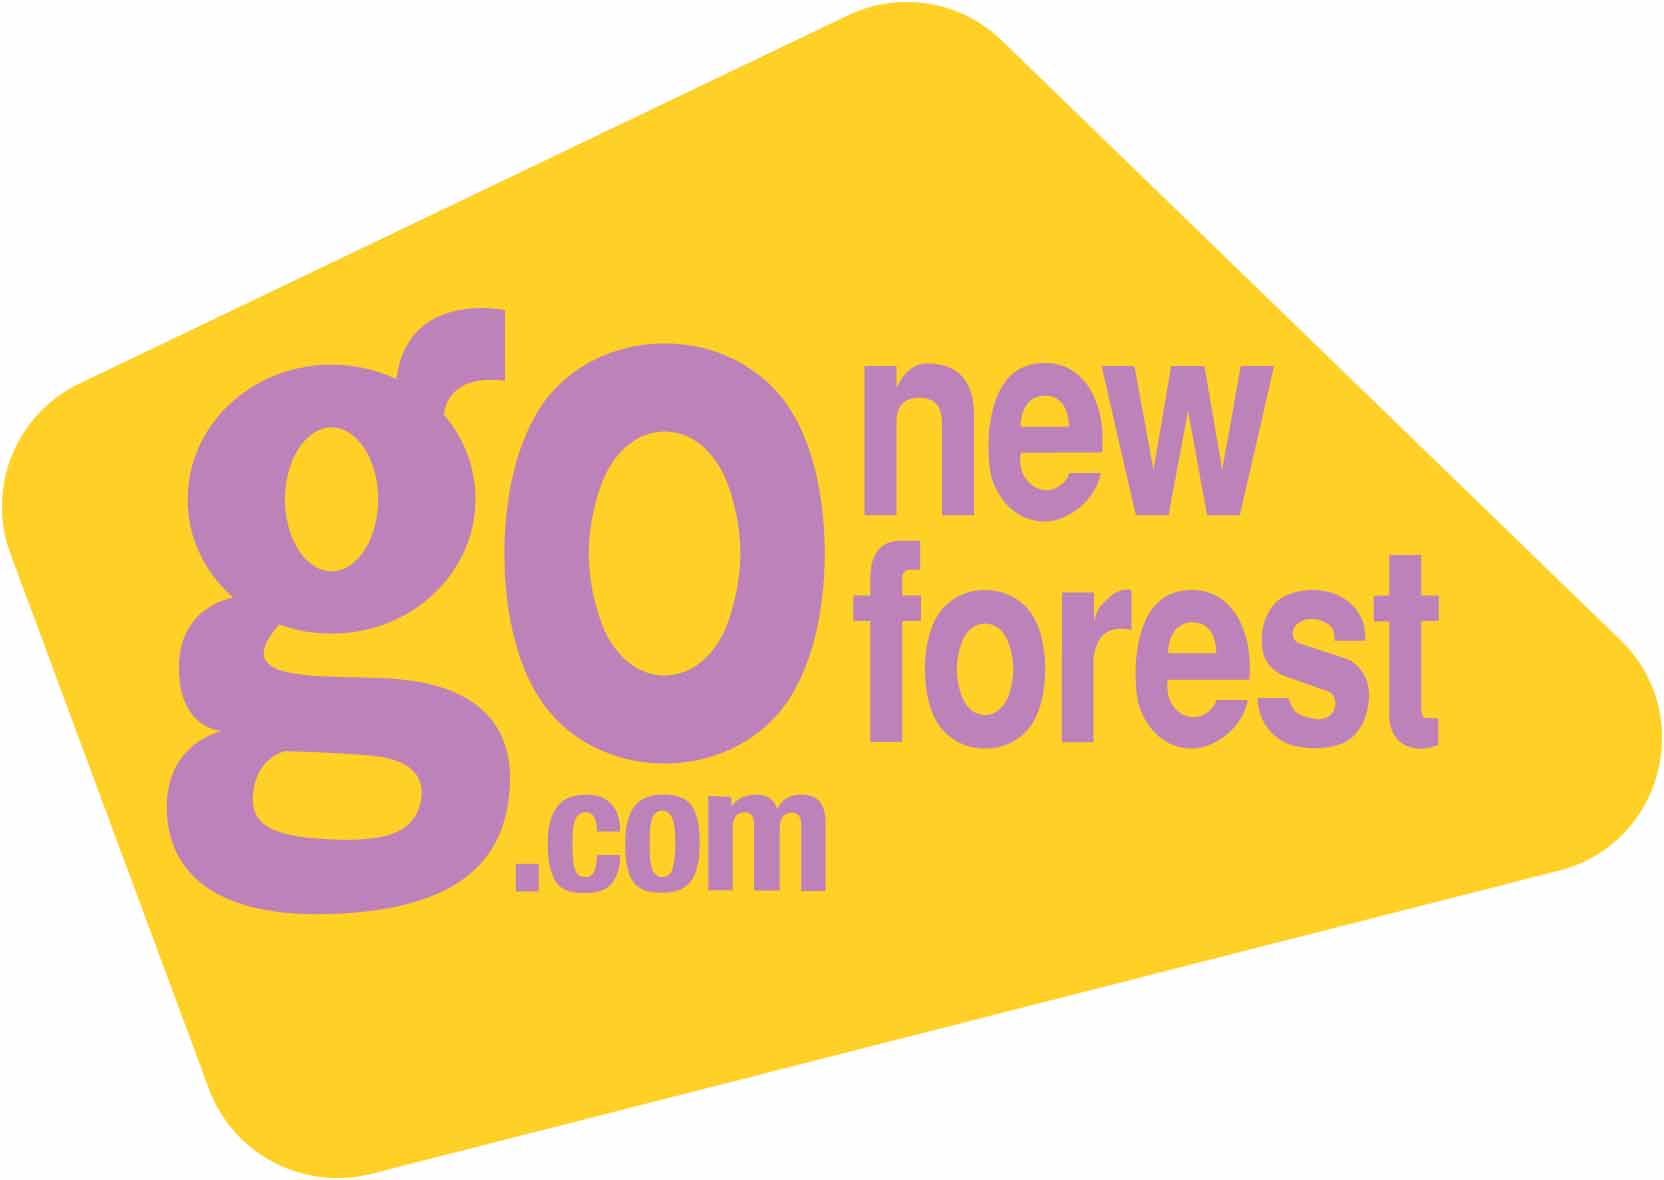 Go New Forest